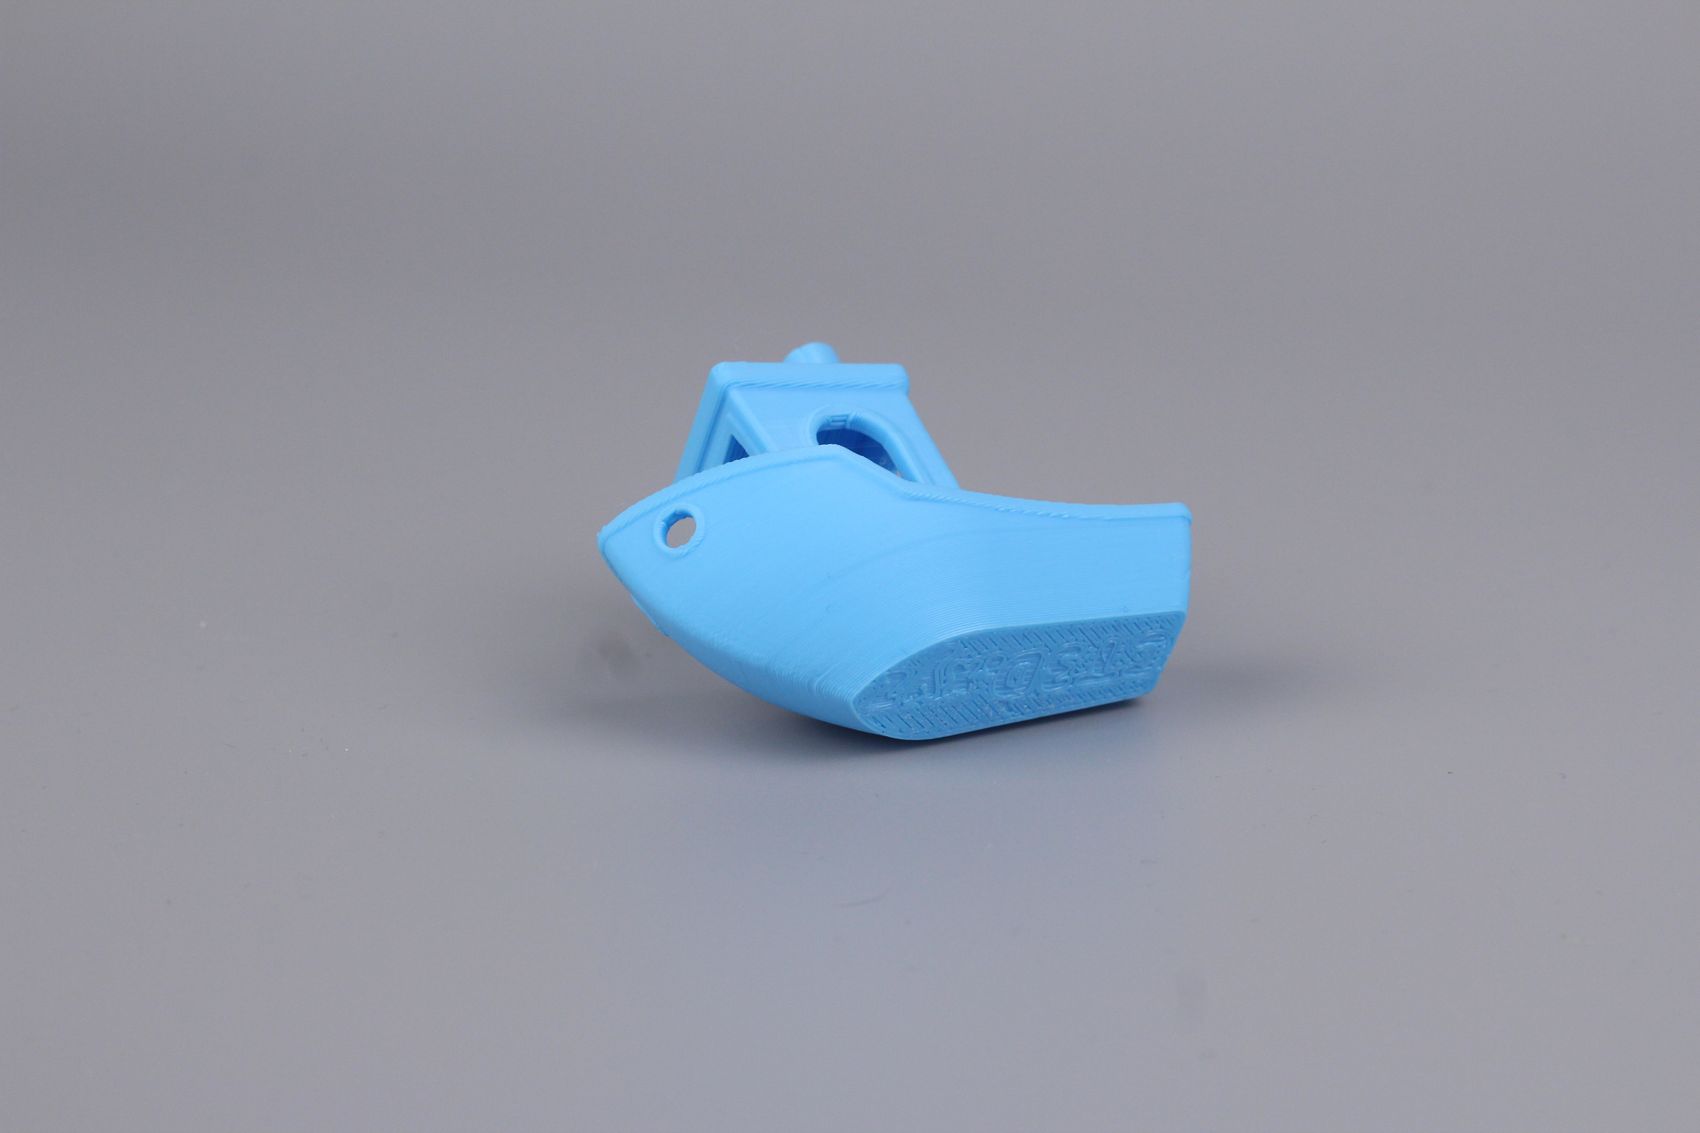 Ender 5 S1 Review 3D benchy4 | Creality Ender-5 S1 Review: Is it a worthy upgrade?